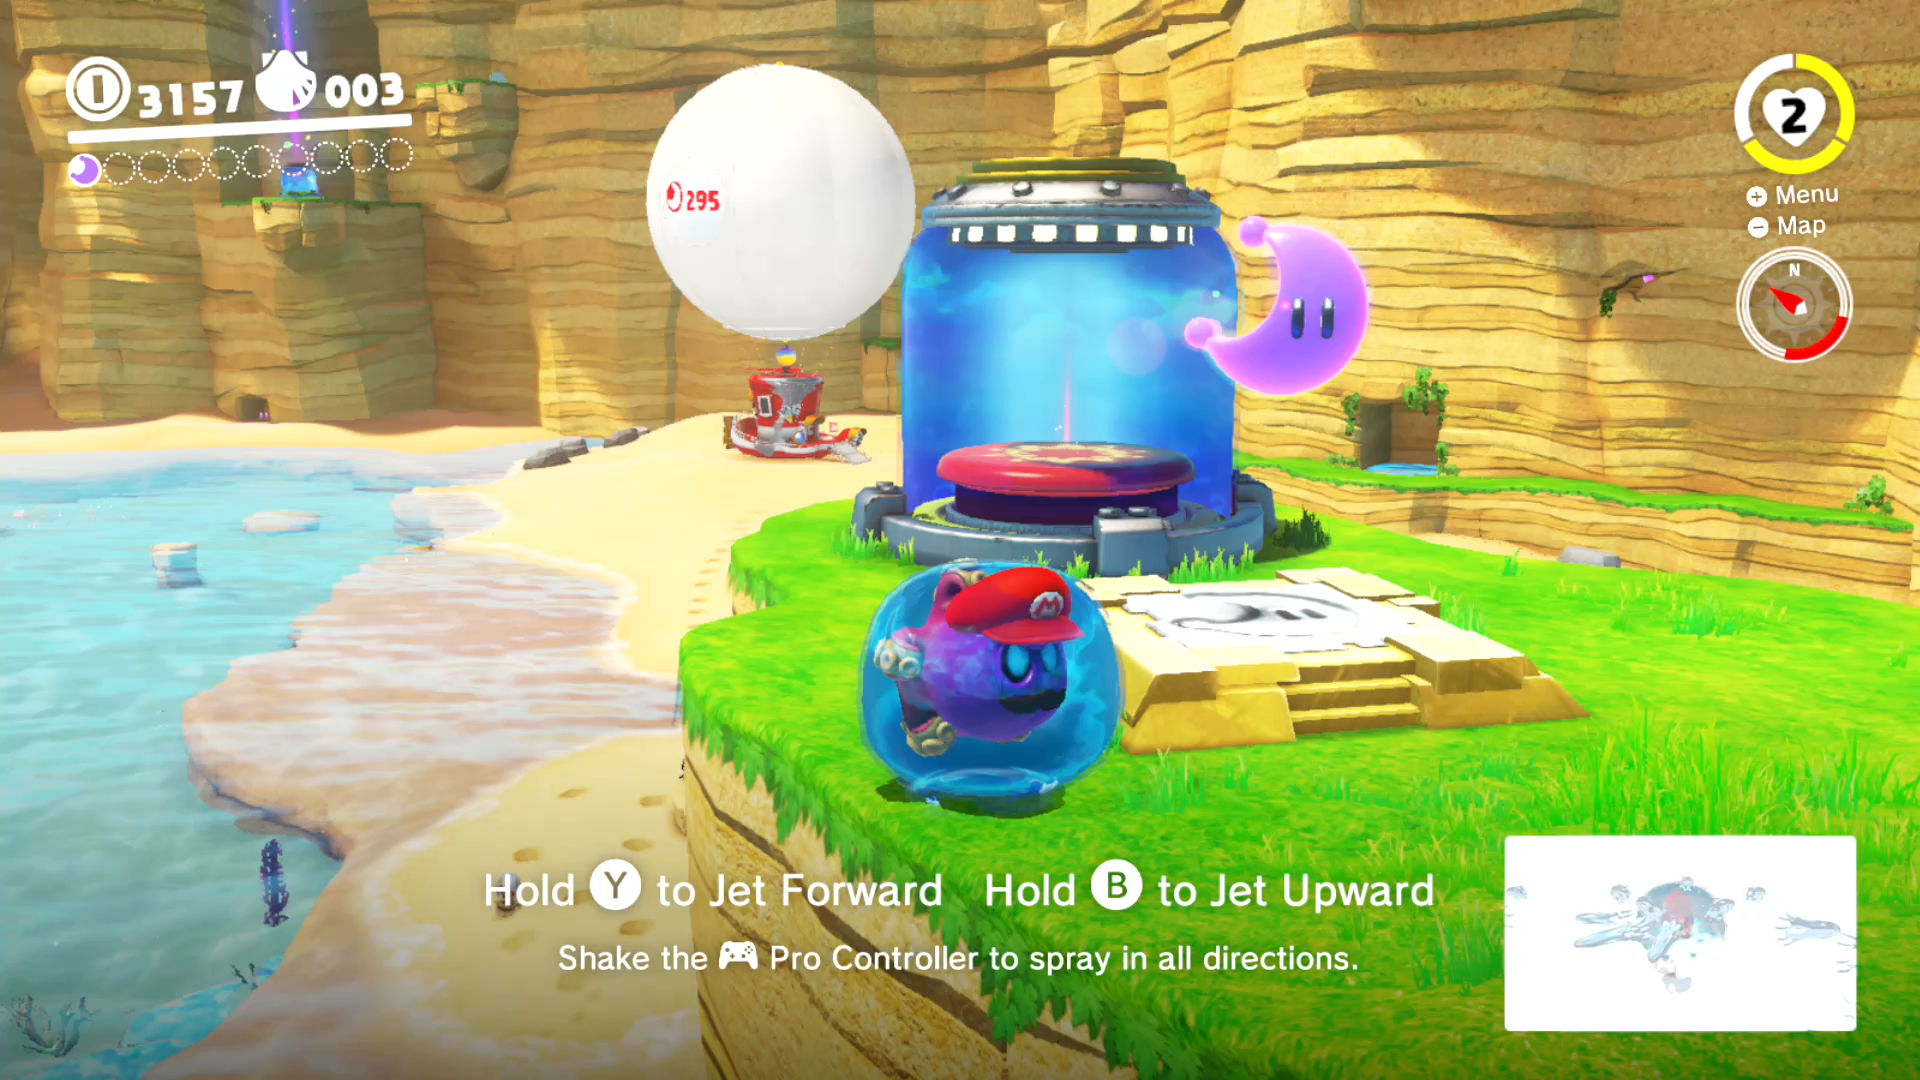 List Of All Kingdoms And Power Moons In Super Mario Odyssey